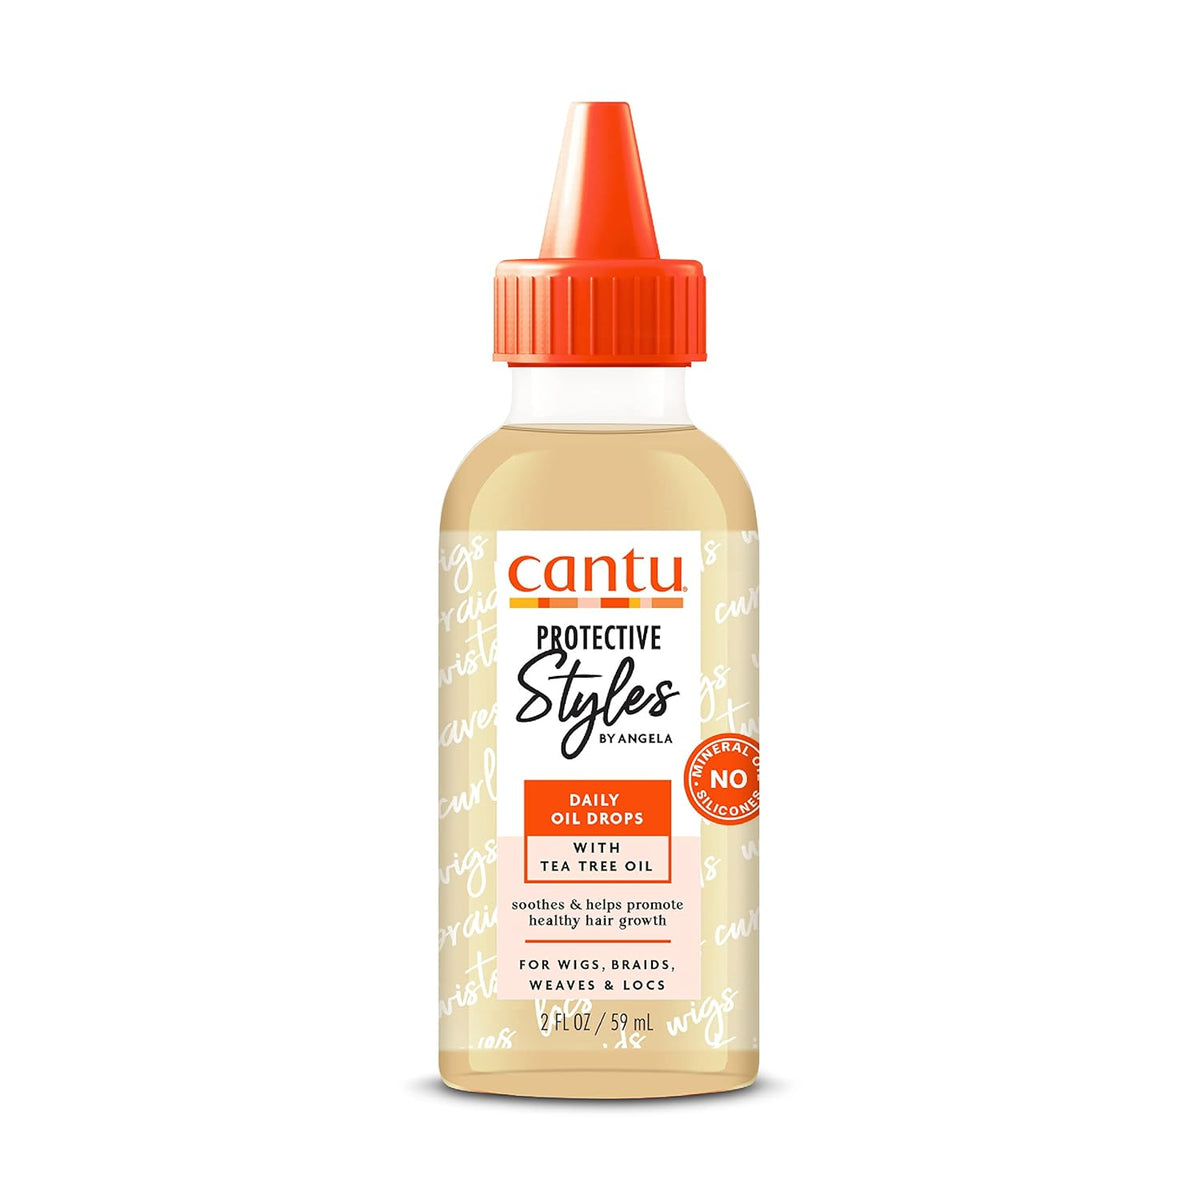 Cantu Protective Styles Hair growth by Angela Daily Oil Drops with Tea Tree Oil-59ml